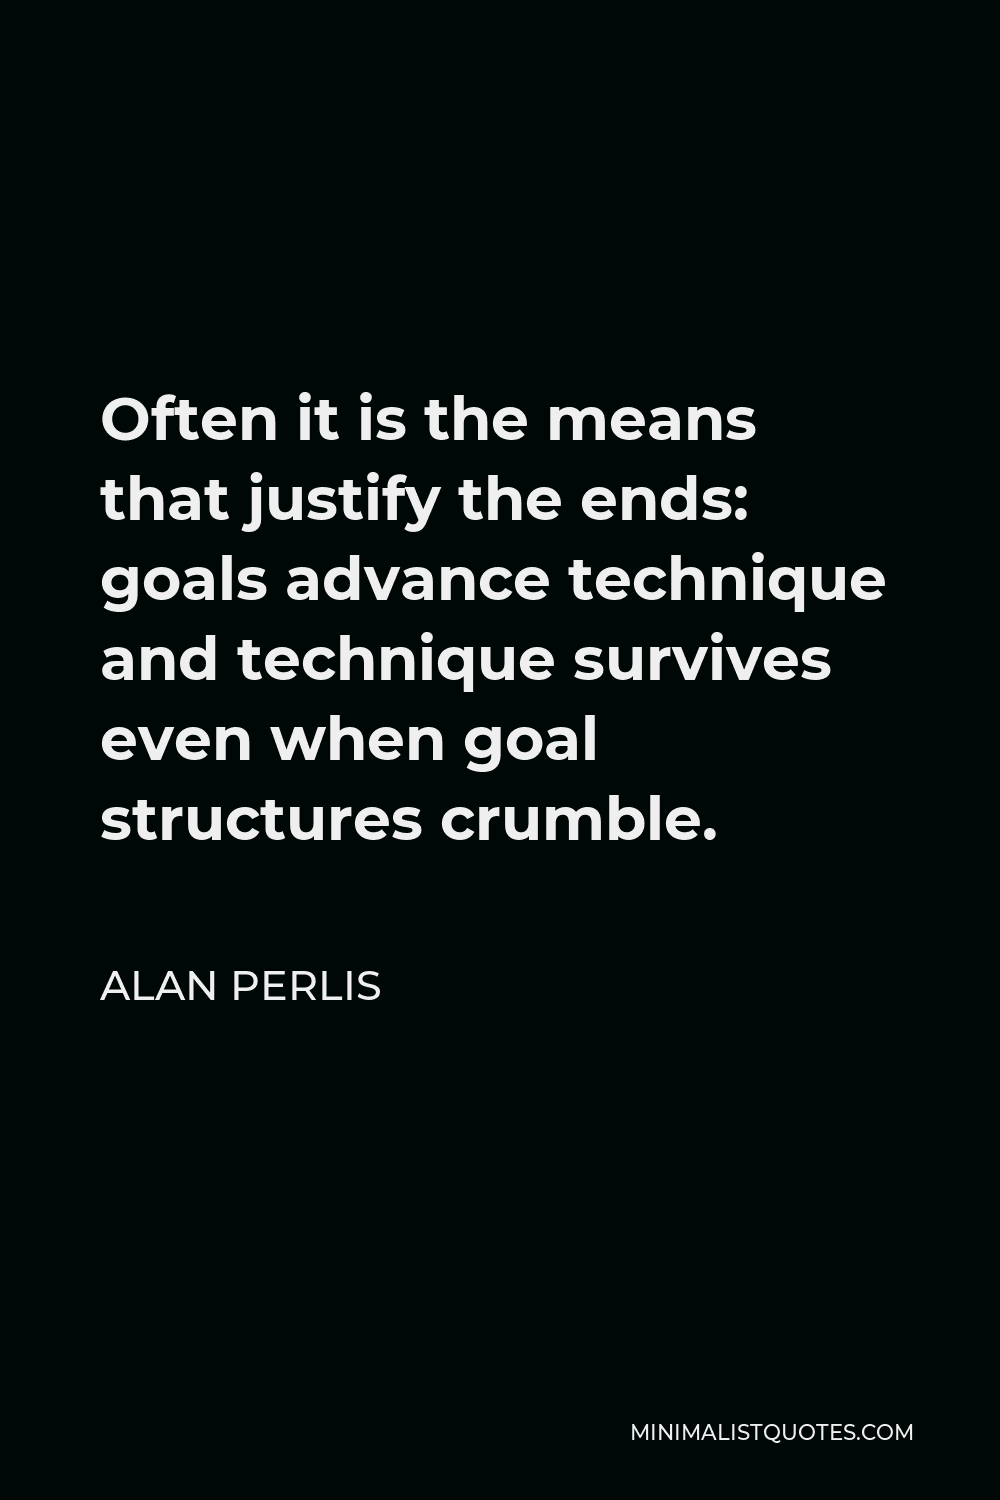 Alan Perlis Quote - Often it is the means that justify the ends: goals advance technique and technique survives even when goal structures crumble.